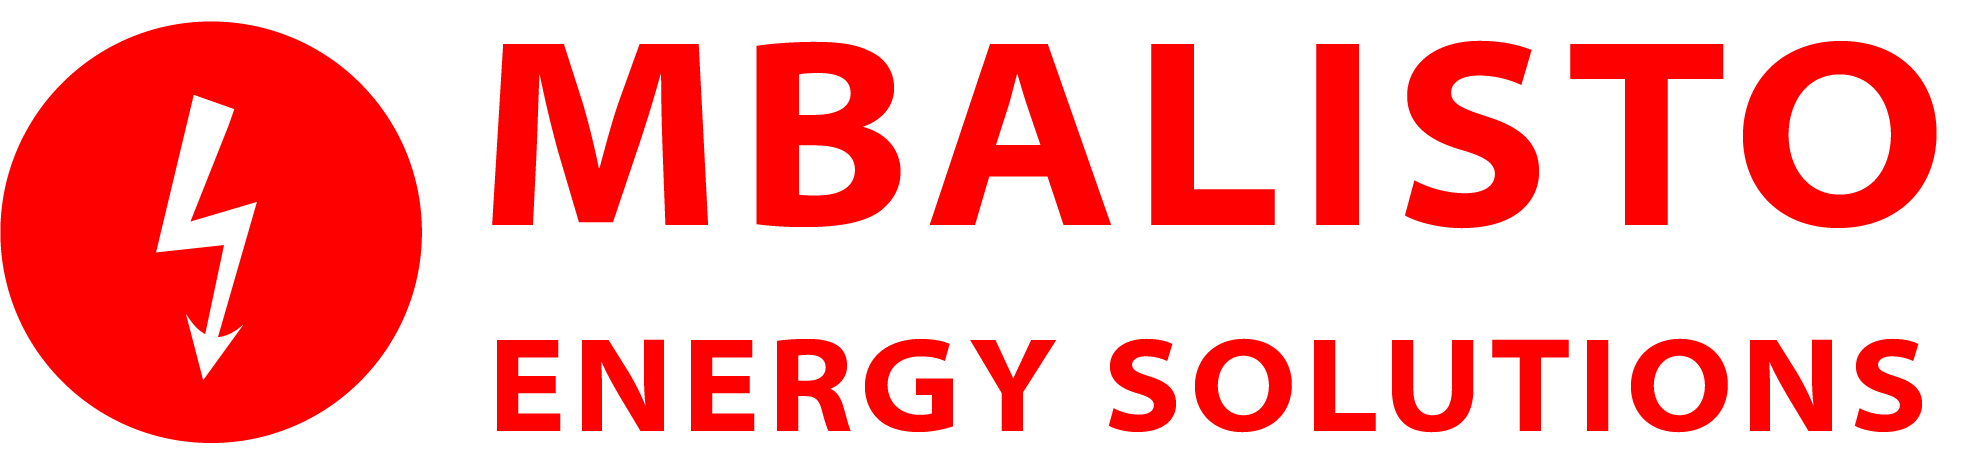 MBALISTO ENERGY SOLUTIONS - TRANSPARENT LOGO (2)